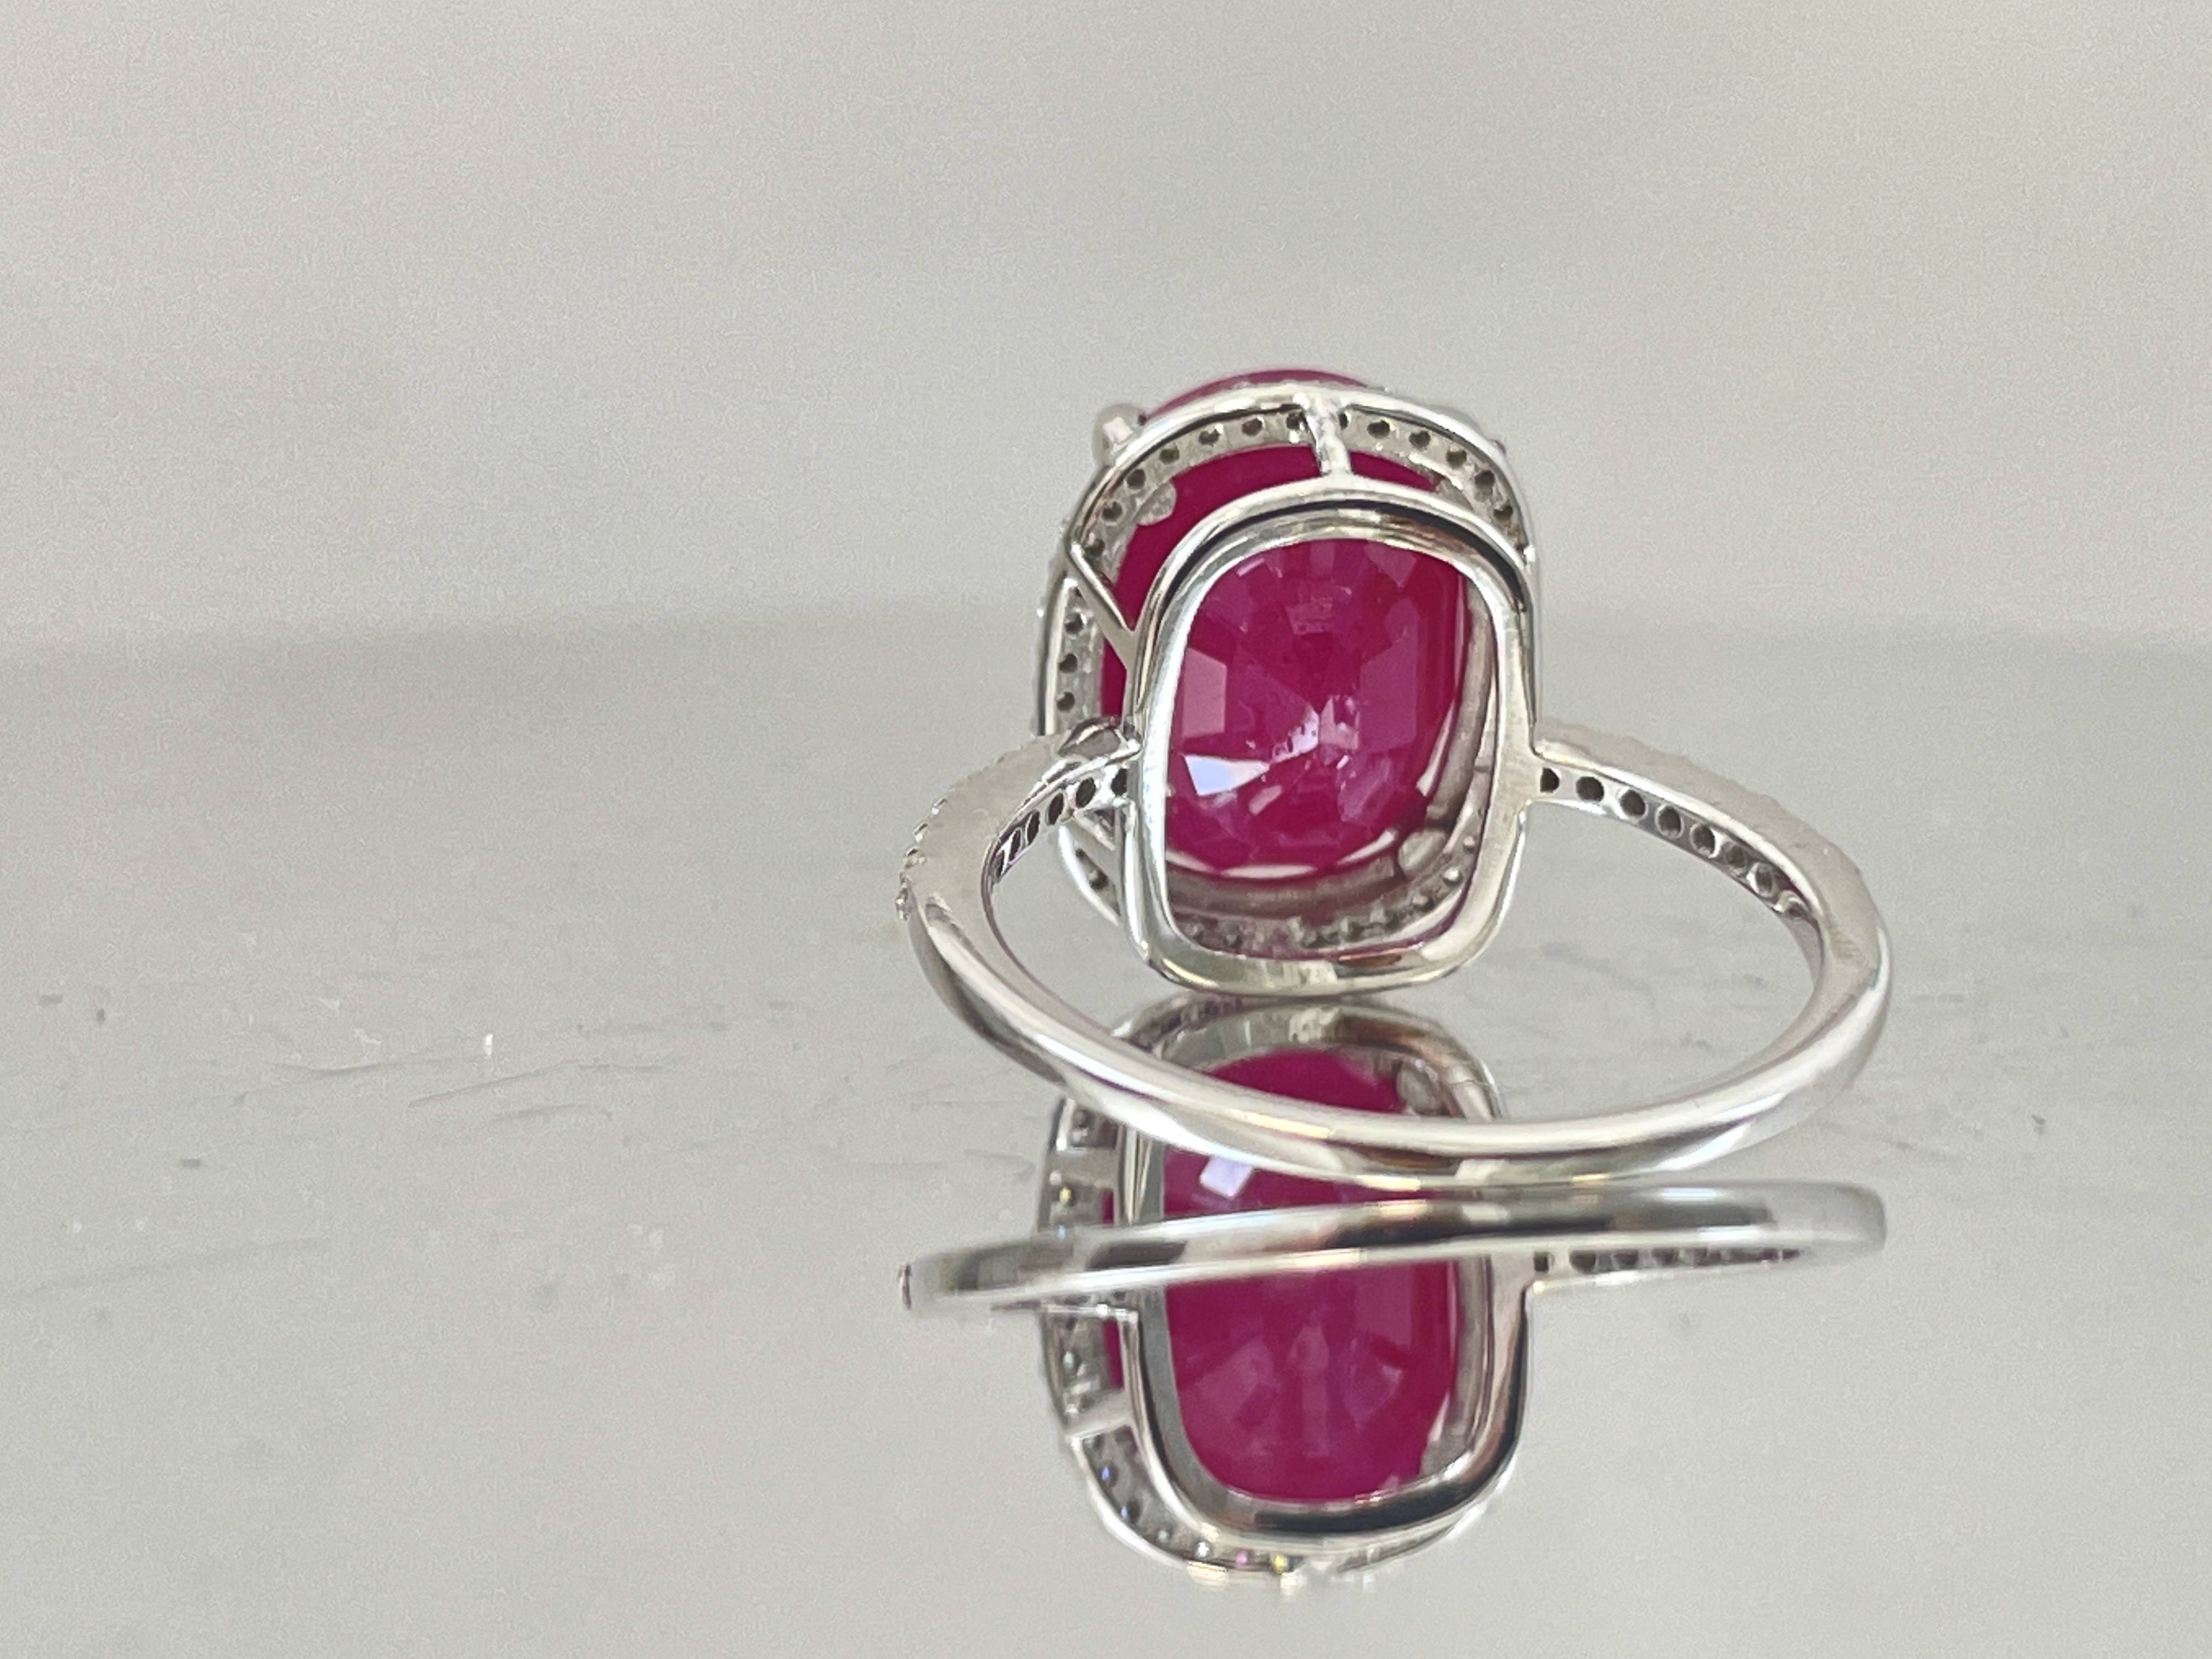 Natural Burma Ruby 9.16 Ct With Natural Diamonds & 18kGold - Image 6 of 7